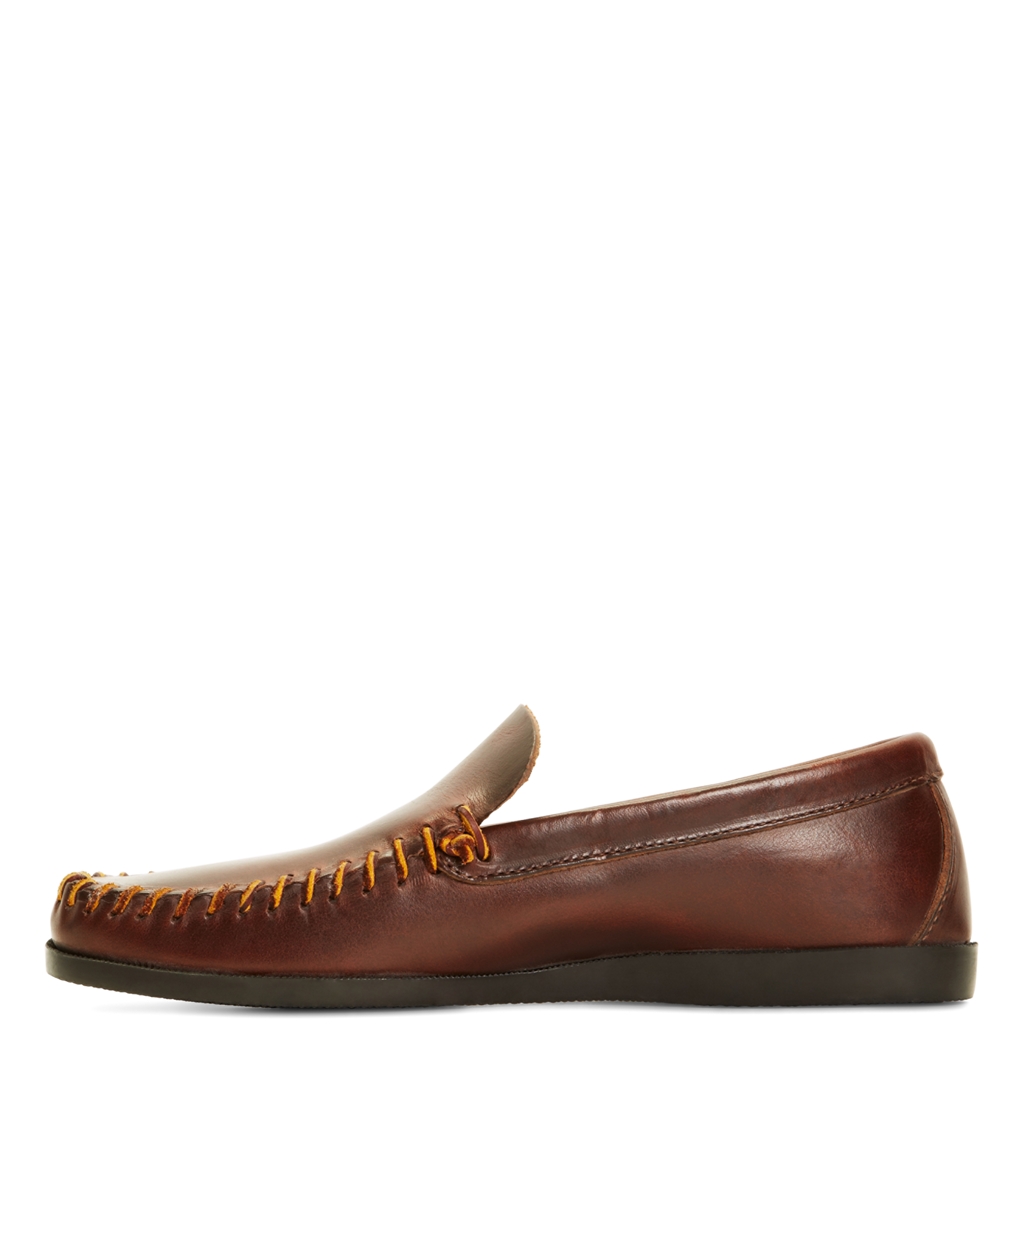 Brooks brothers Rancourt & Co. Leather Whipstitch Vent Loafers in Brown ...